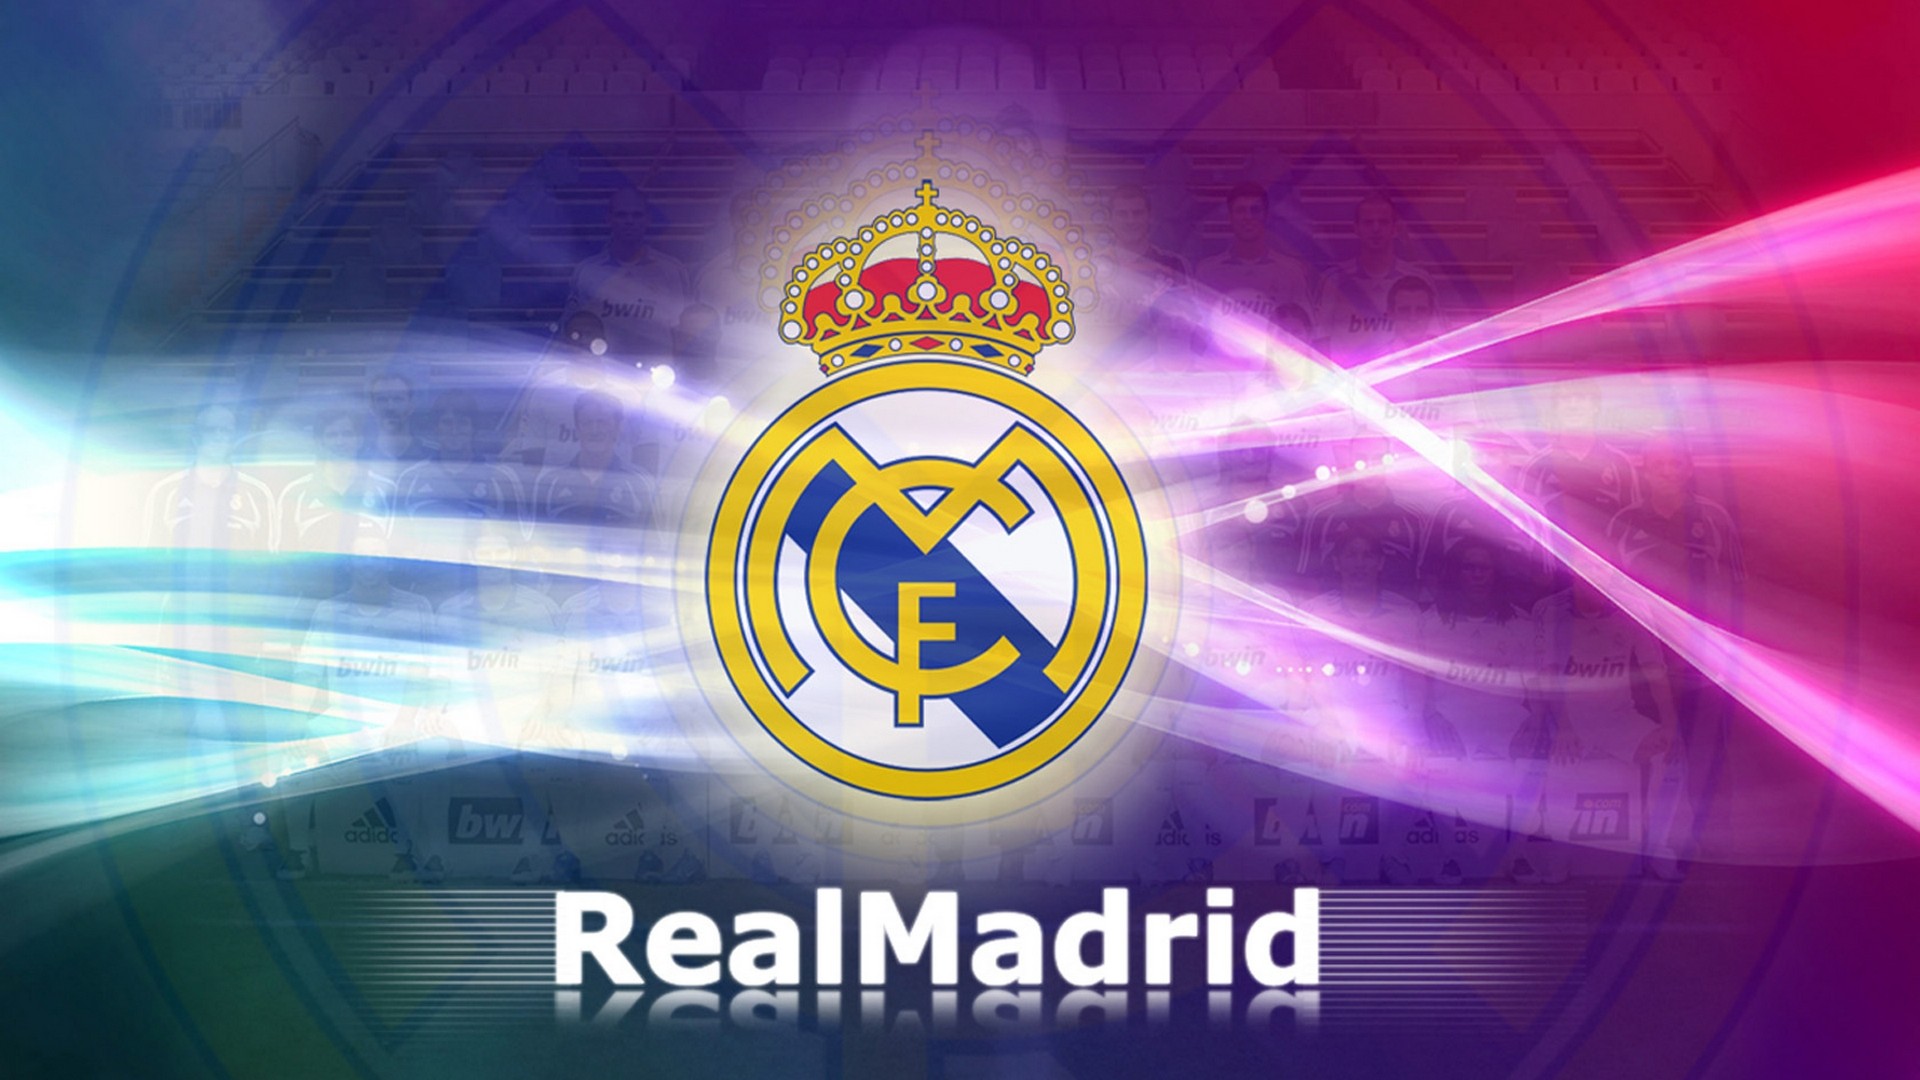 Real Madrid CF Wallpaper For Mac Backgrounds With Resolution 1920X1080 pixel. You can make this wallpaper for your Mac or Windows Desktop Background, iPhone, Android or Tablet and another Smartphone device for free